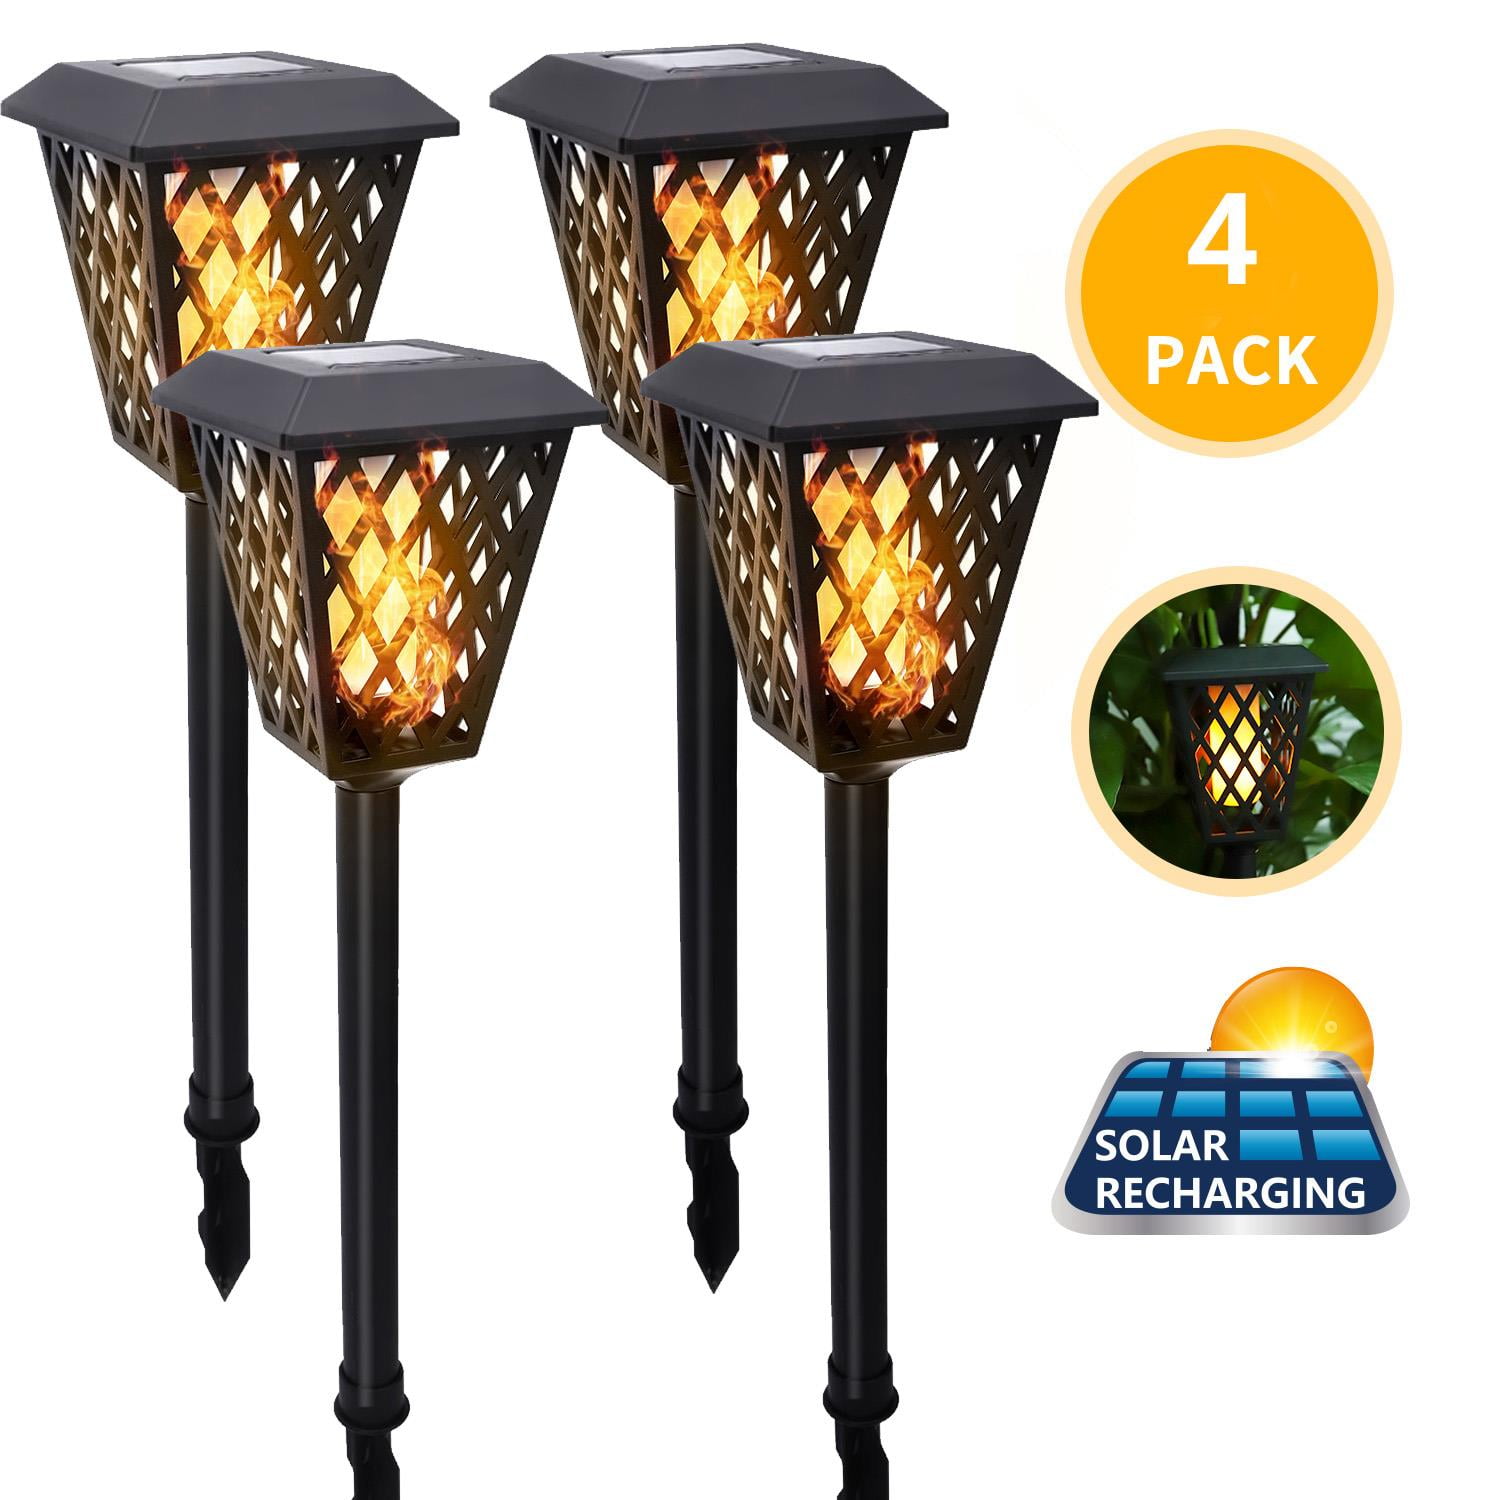 Dusk to Dawn Auto On/Off Security Spotlight for Garden Patio Yard Driveway Solar Torch Lights Outdoor,Waterproof Flickering Dancing Flames Landscape Decoration Lighting 2 Pack 